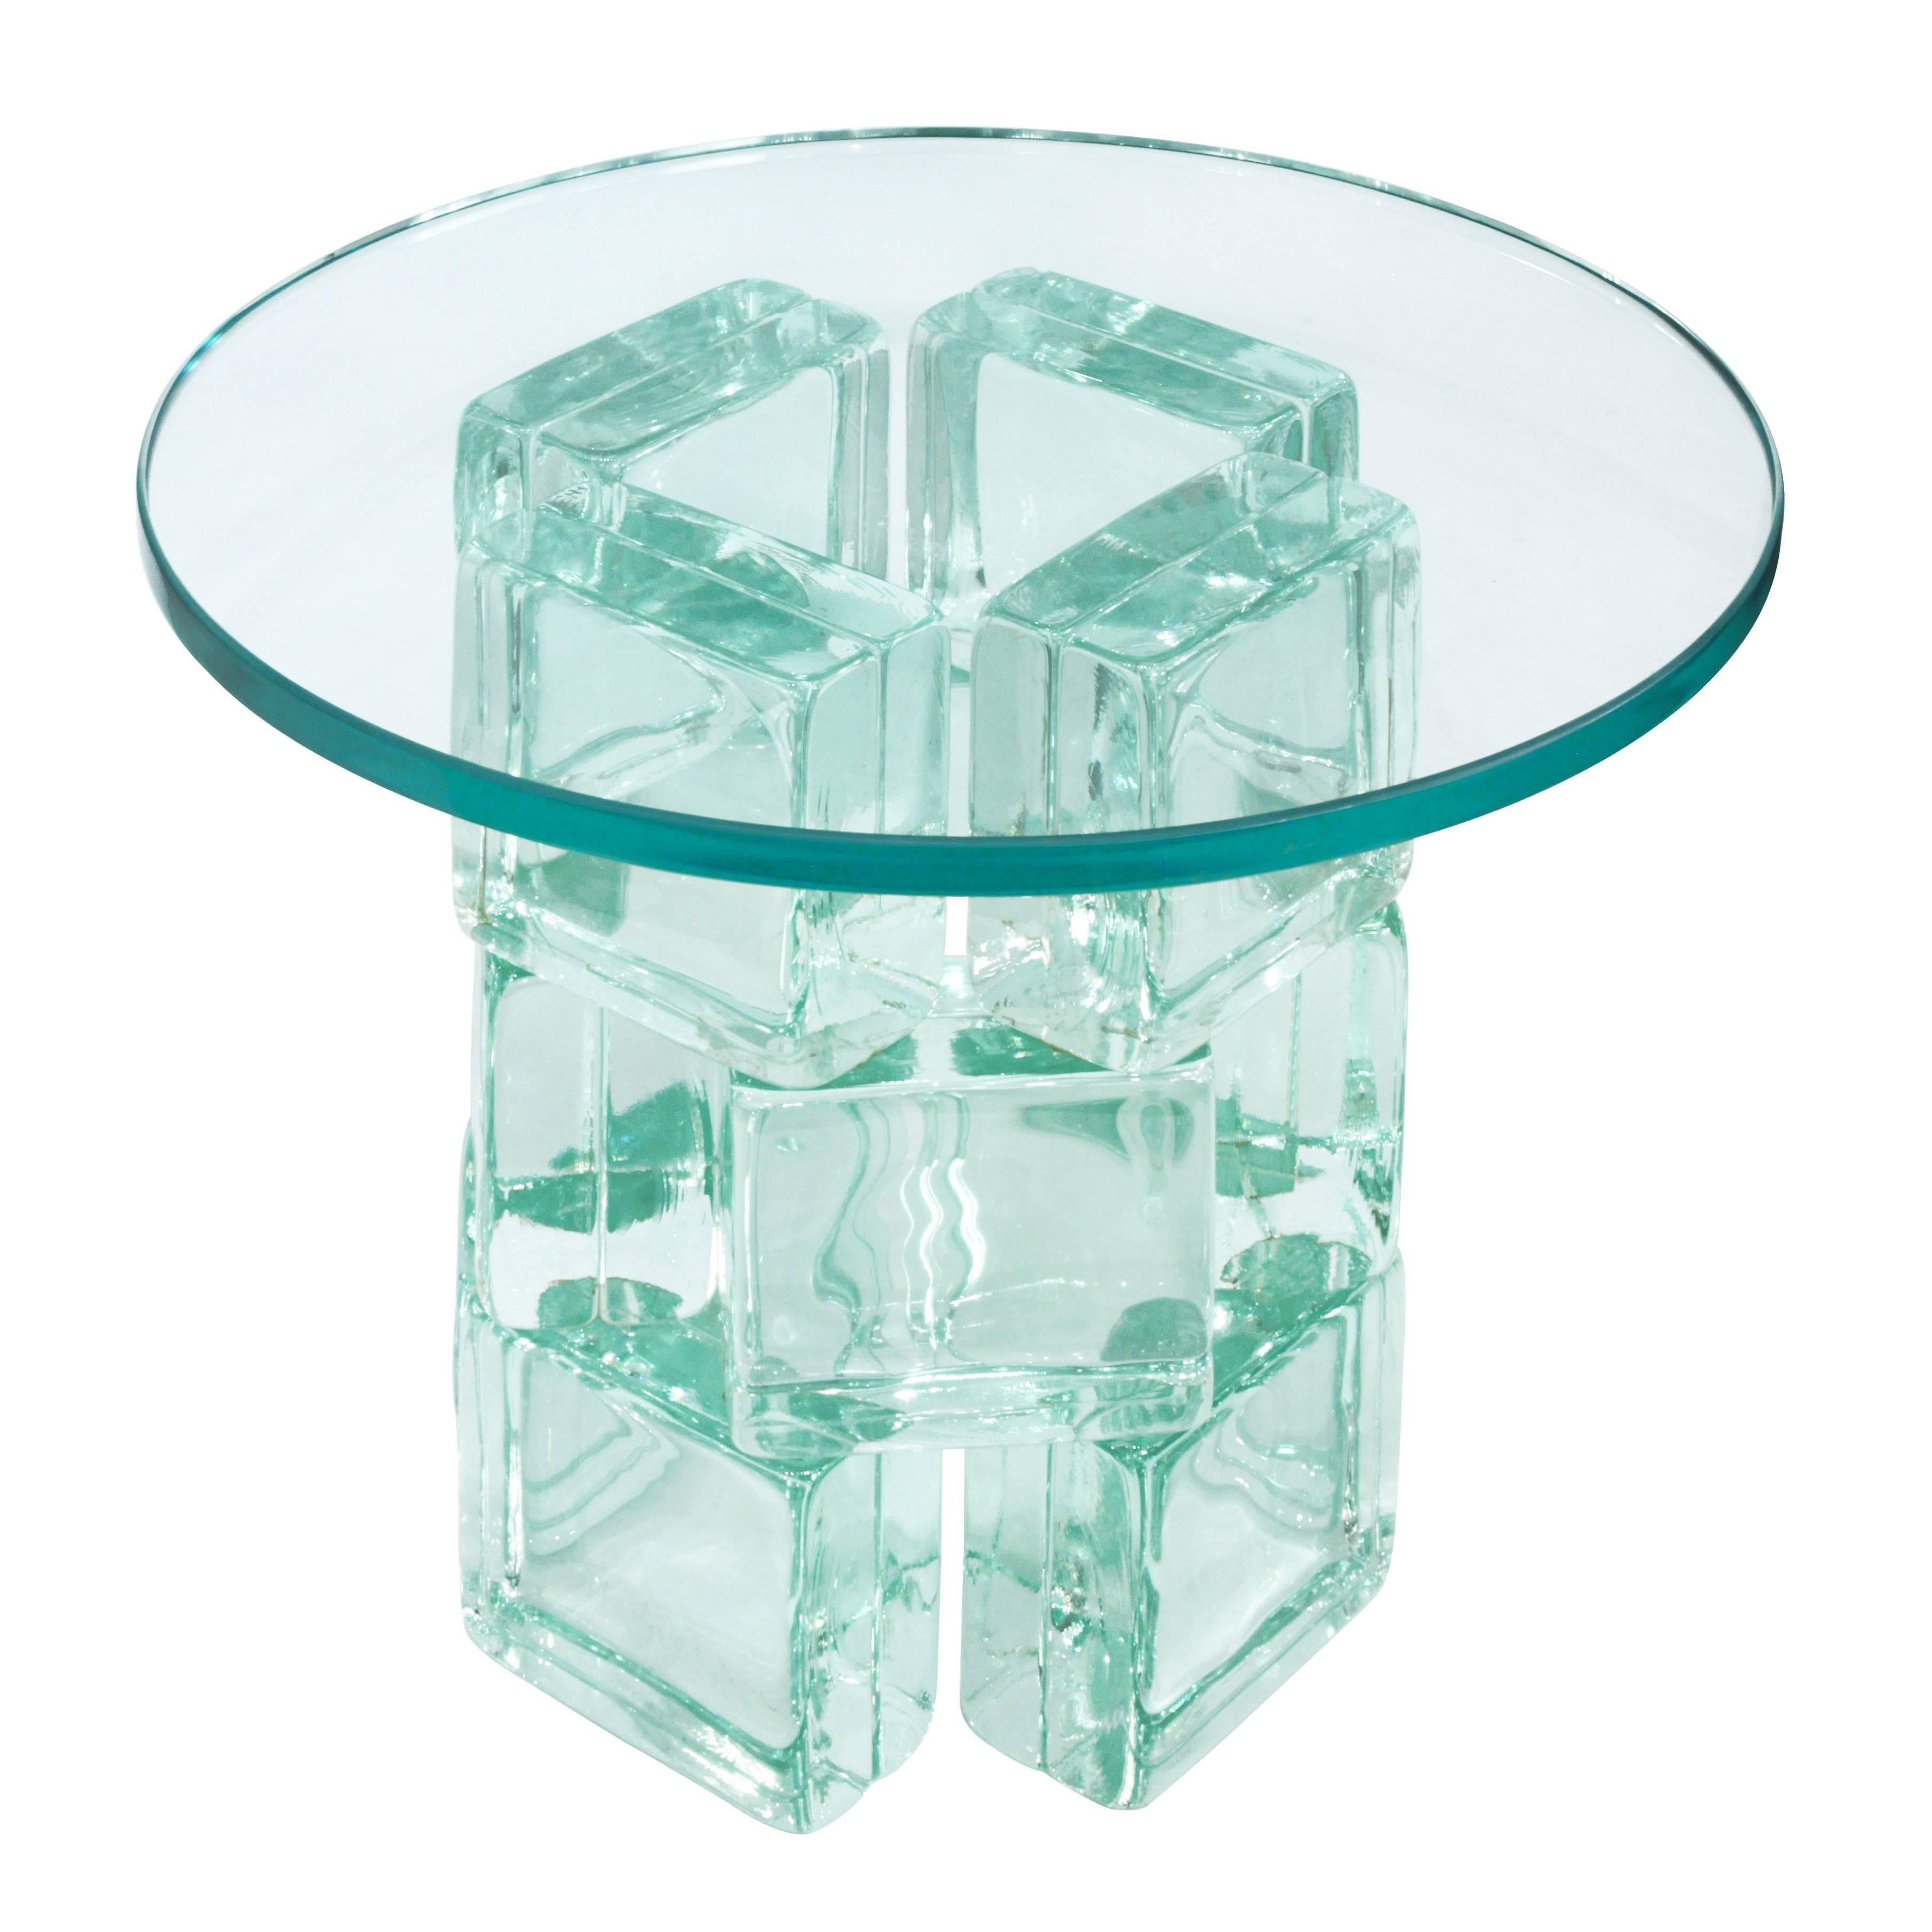 Pair of chic occasional tables with solid glass blocks and glass tops by Imperial Imagineering, American 1981

Glass is a 1/2 inch thick and 18 inches in diameter